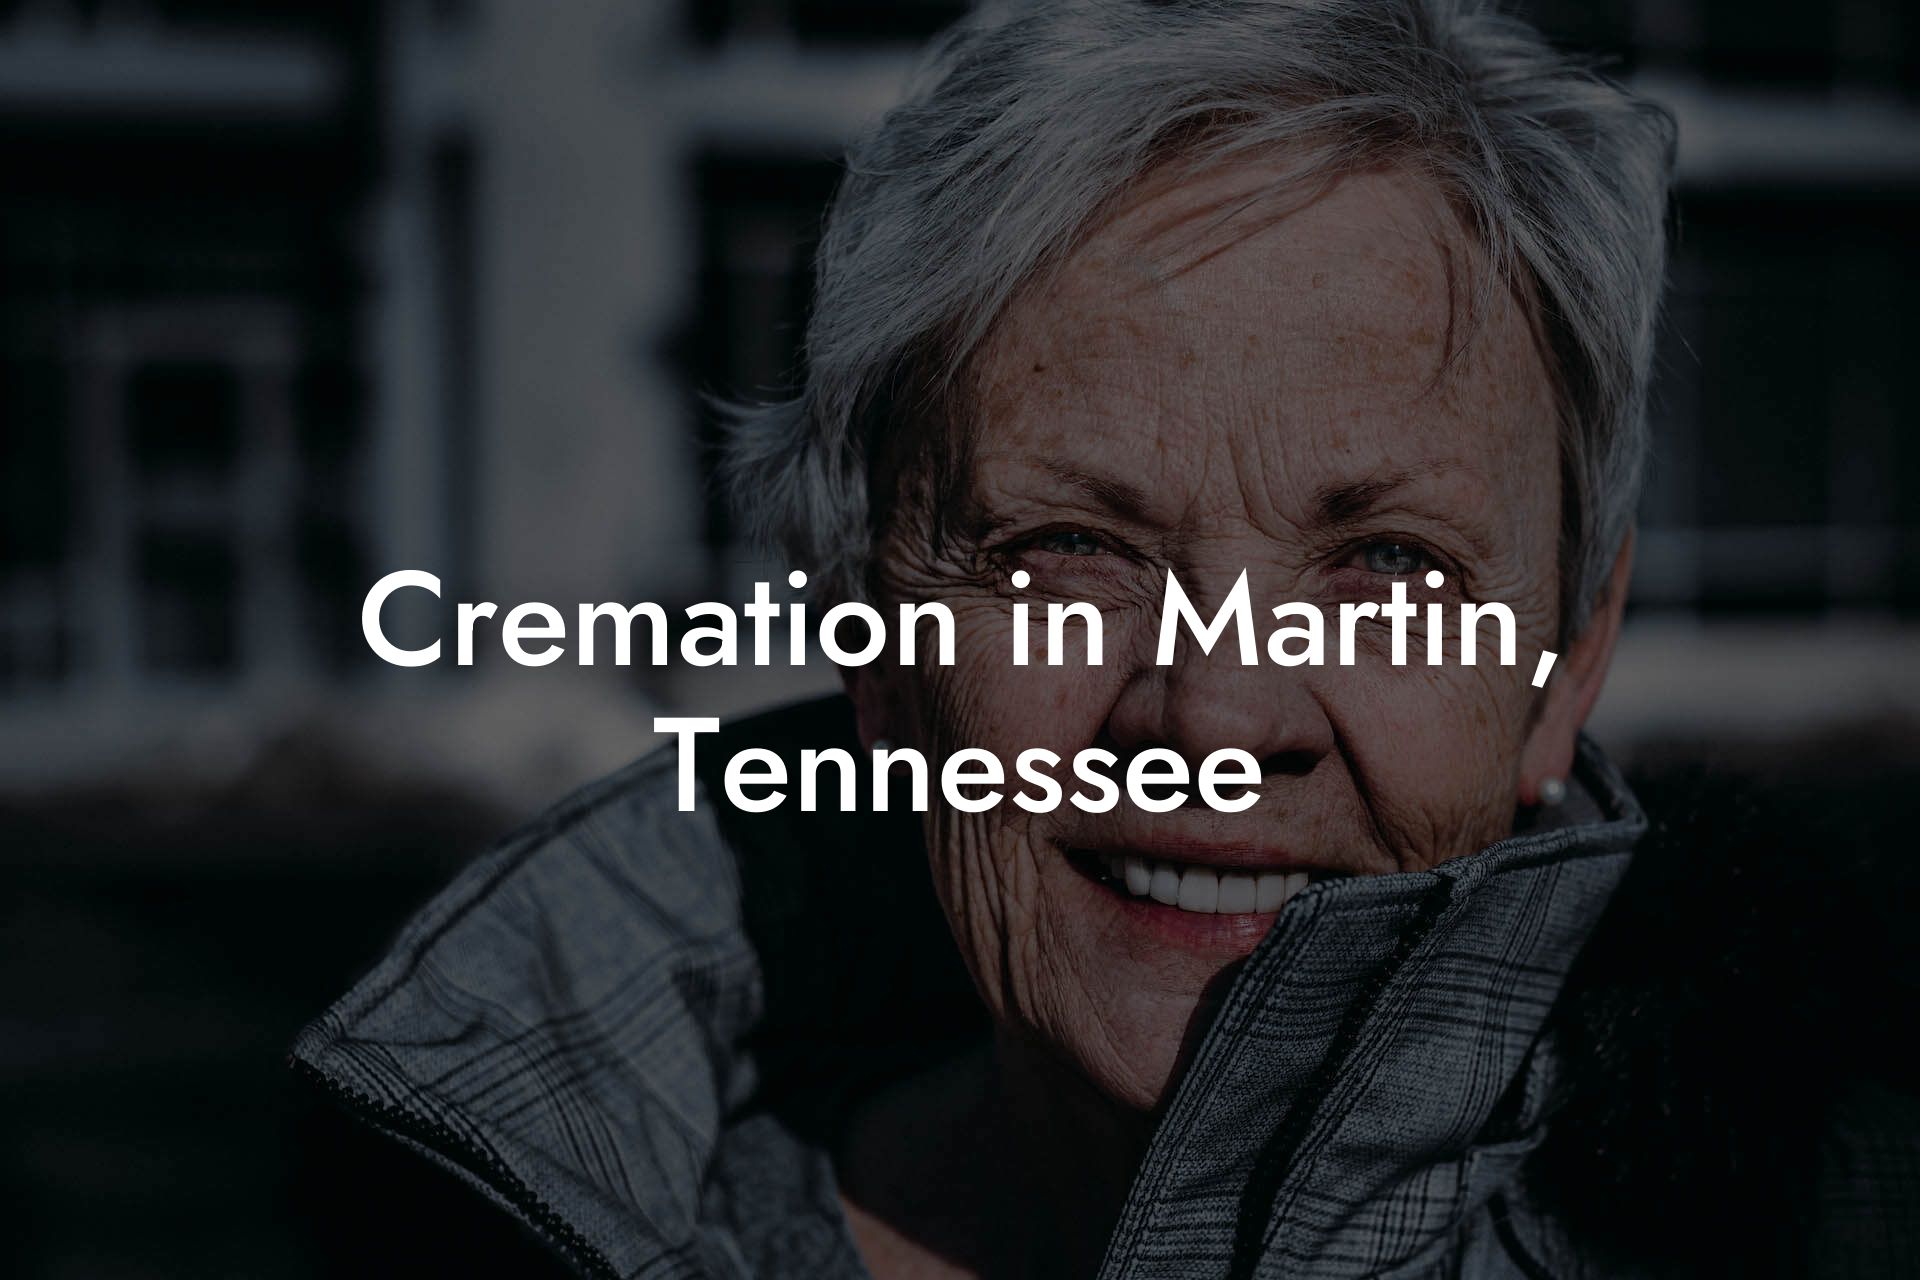 Cremation in Martin, Tennessee